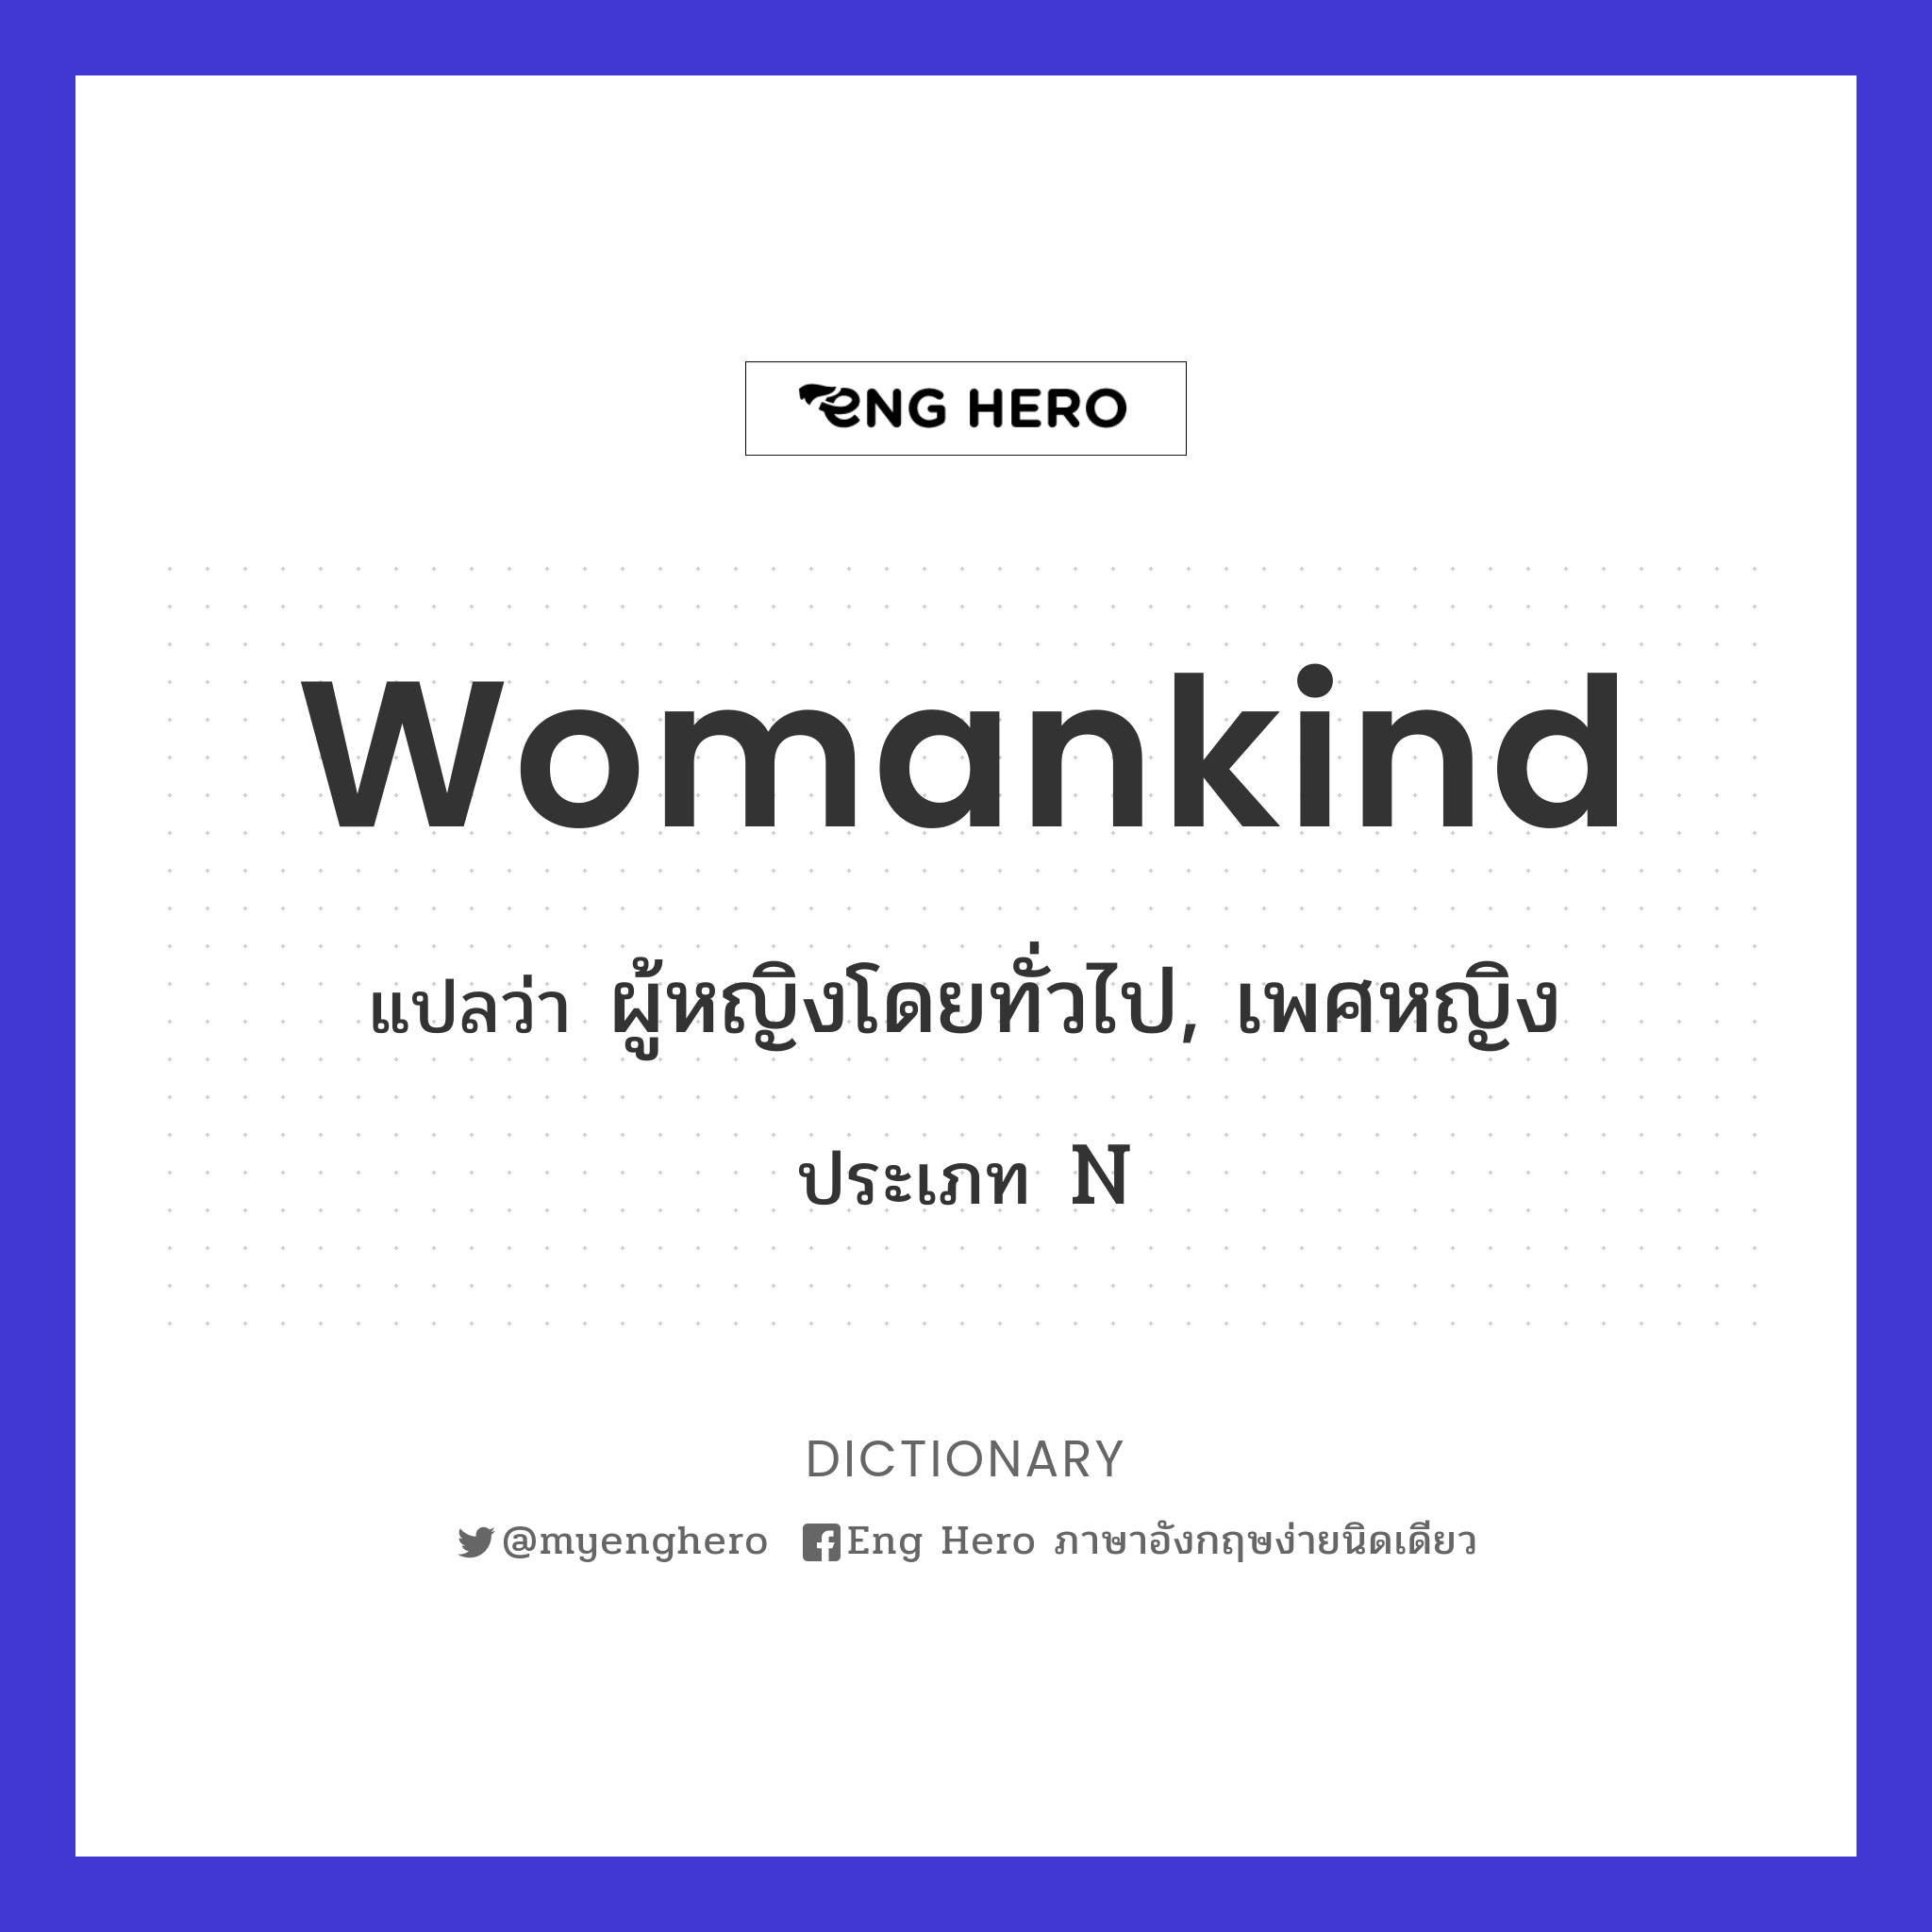 womankind